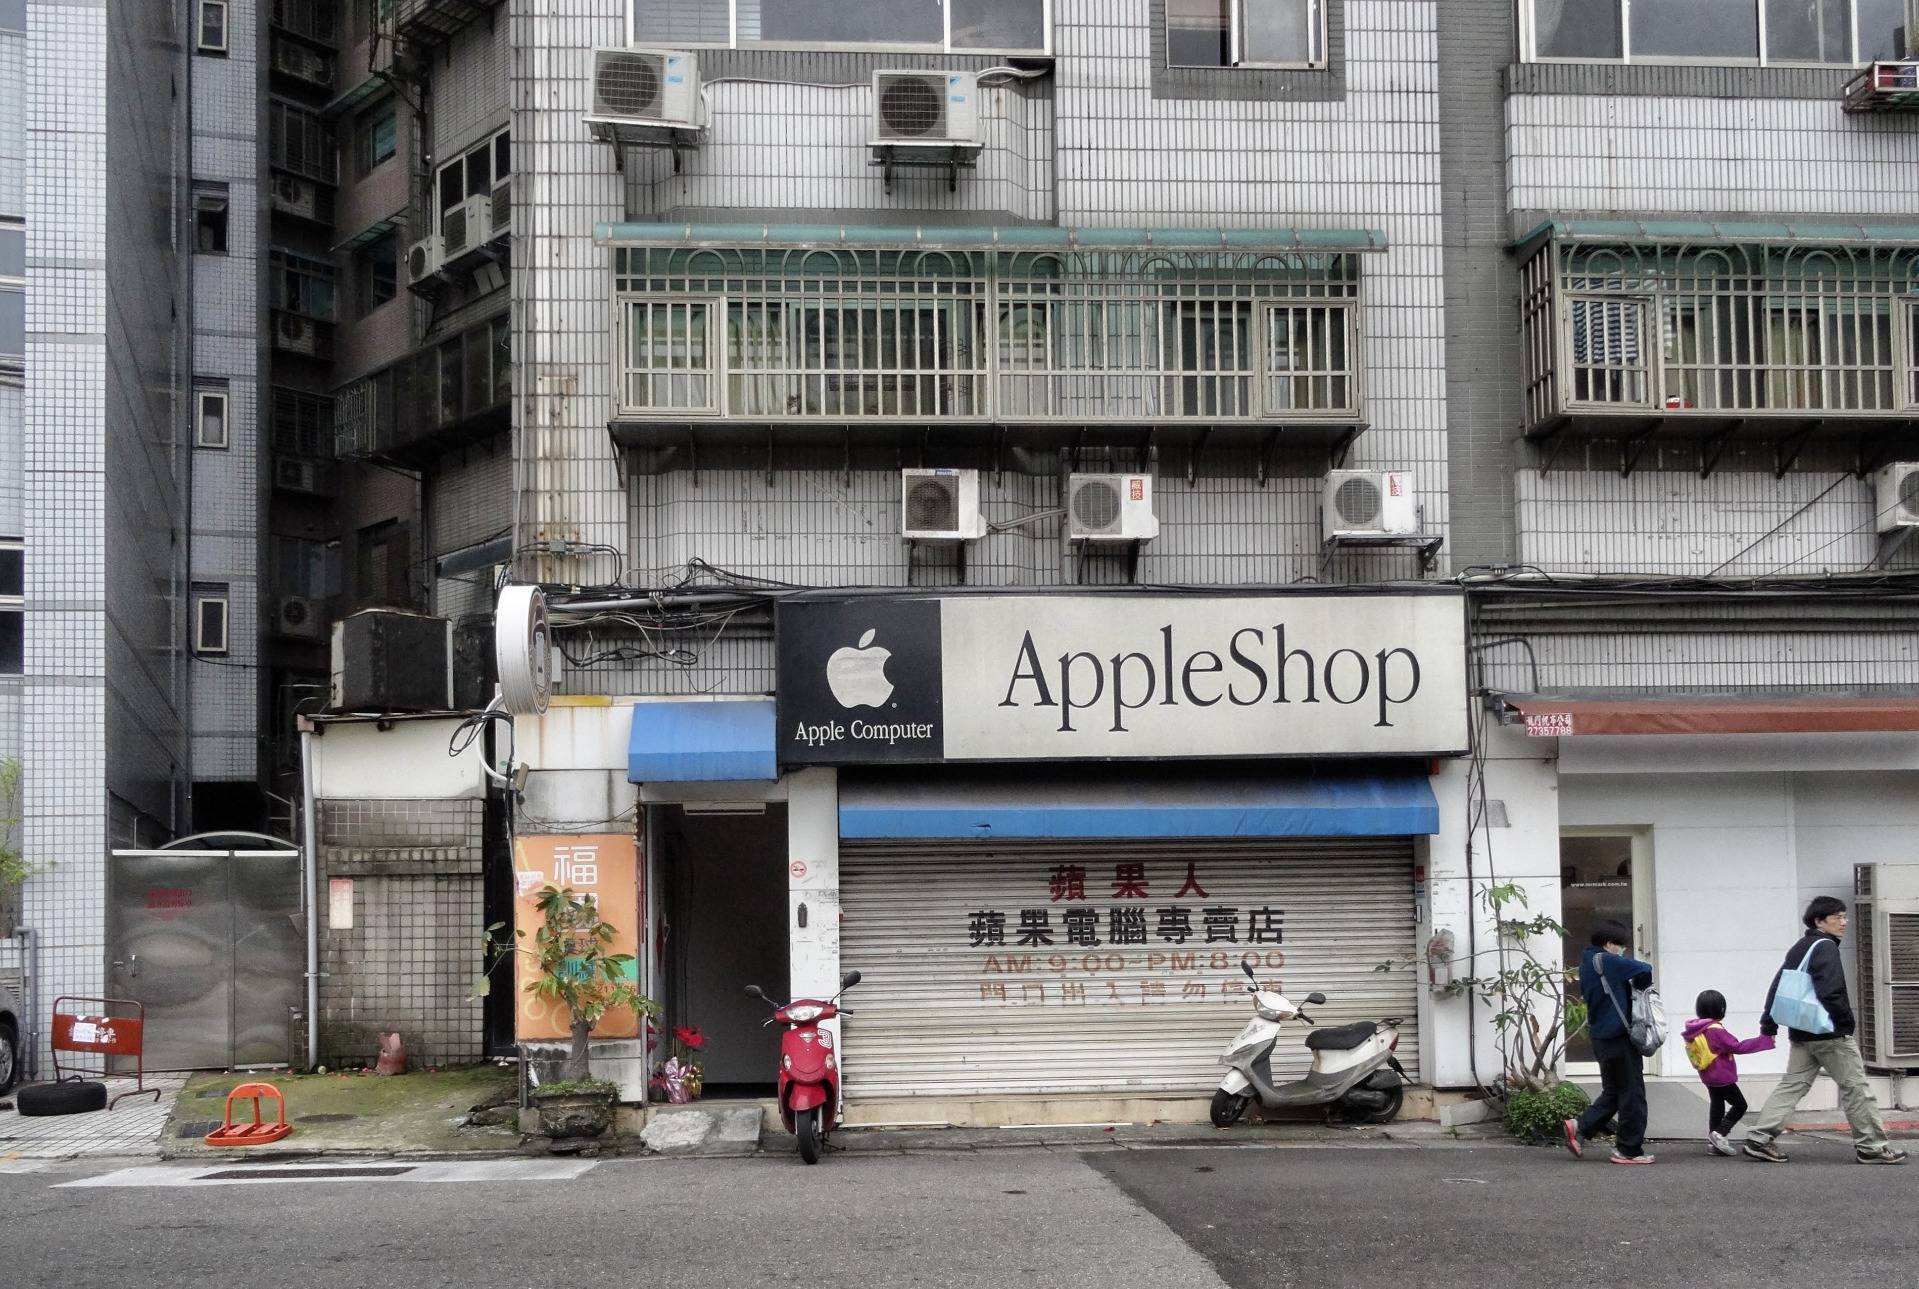 A very special Apple shop